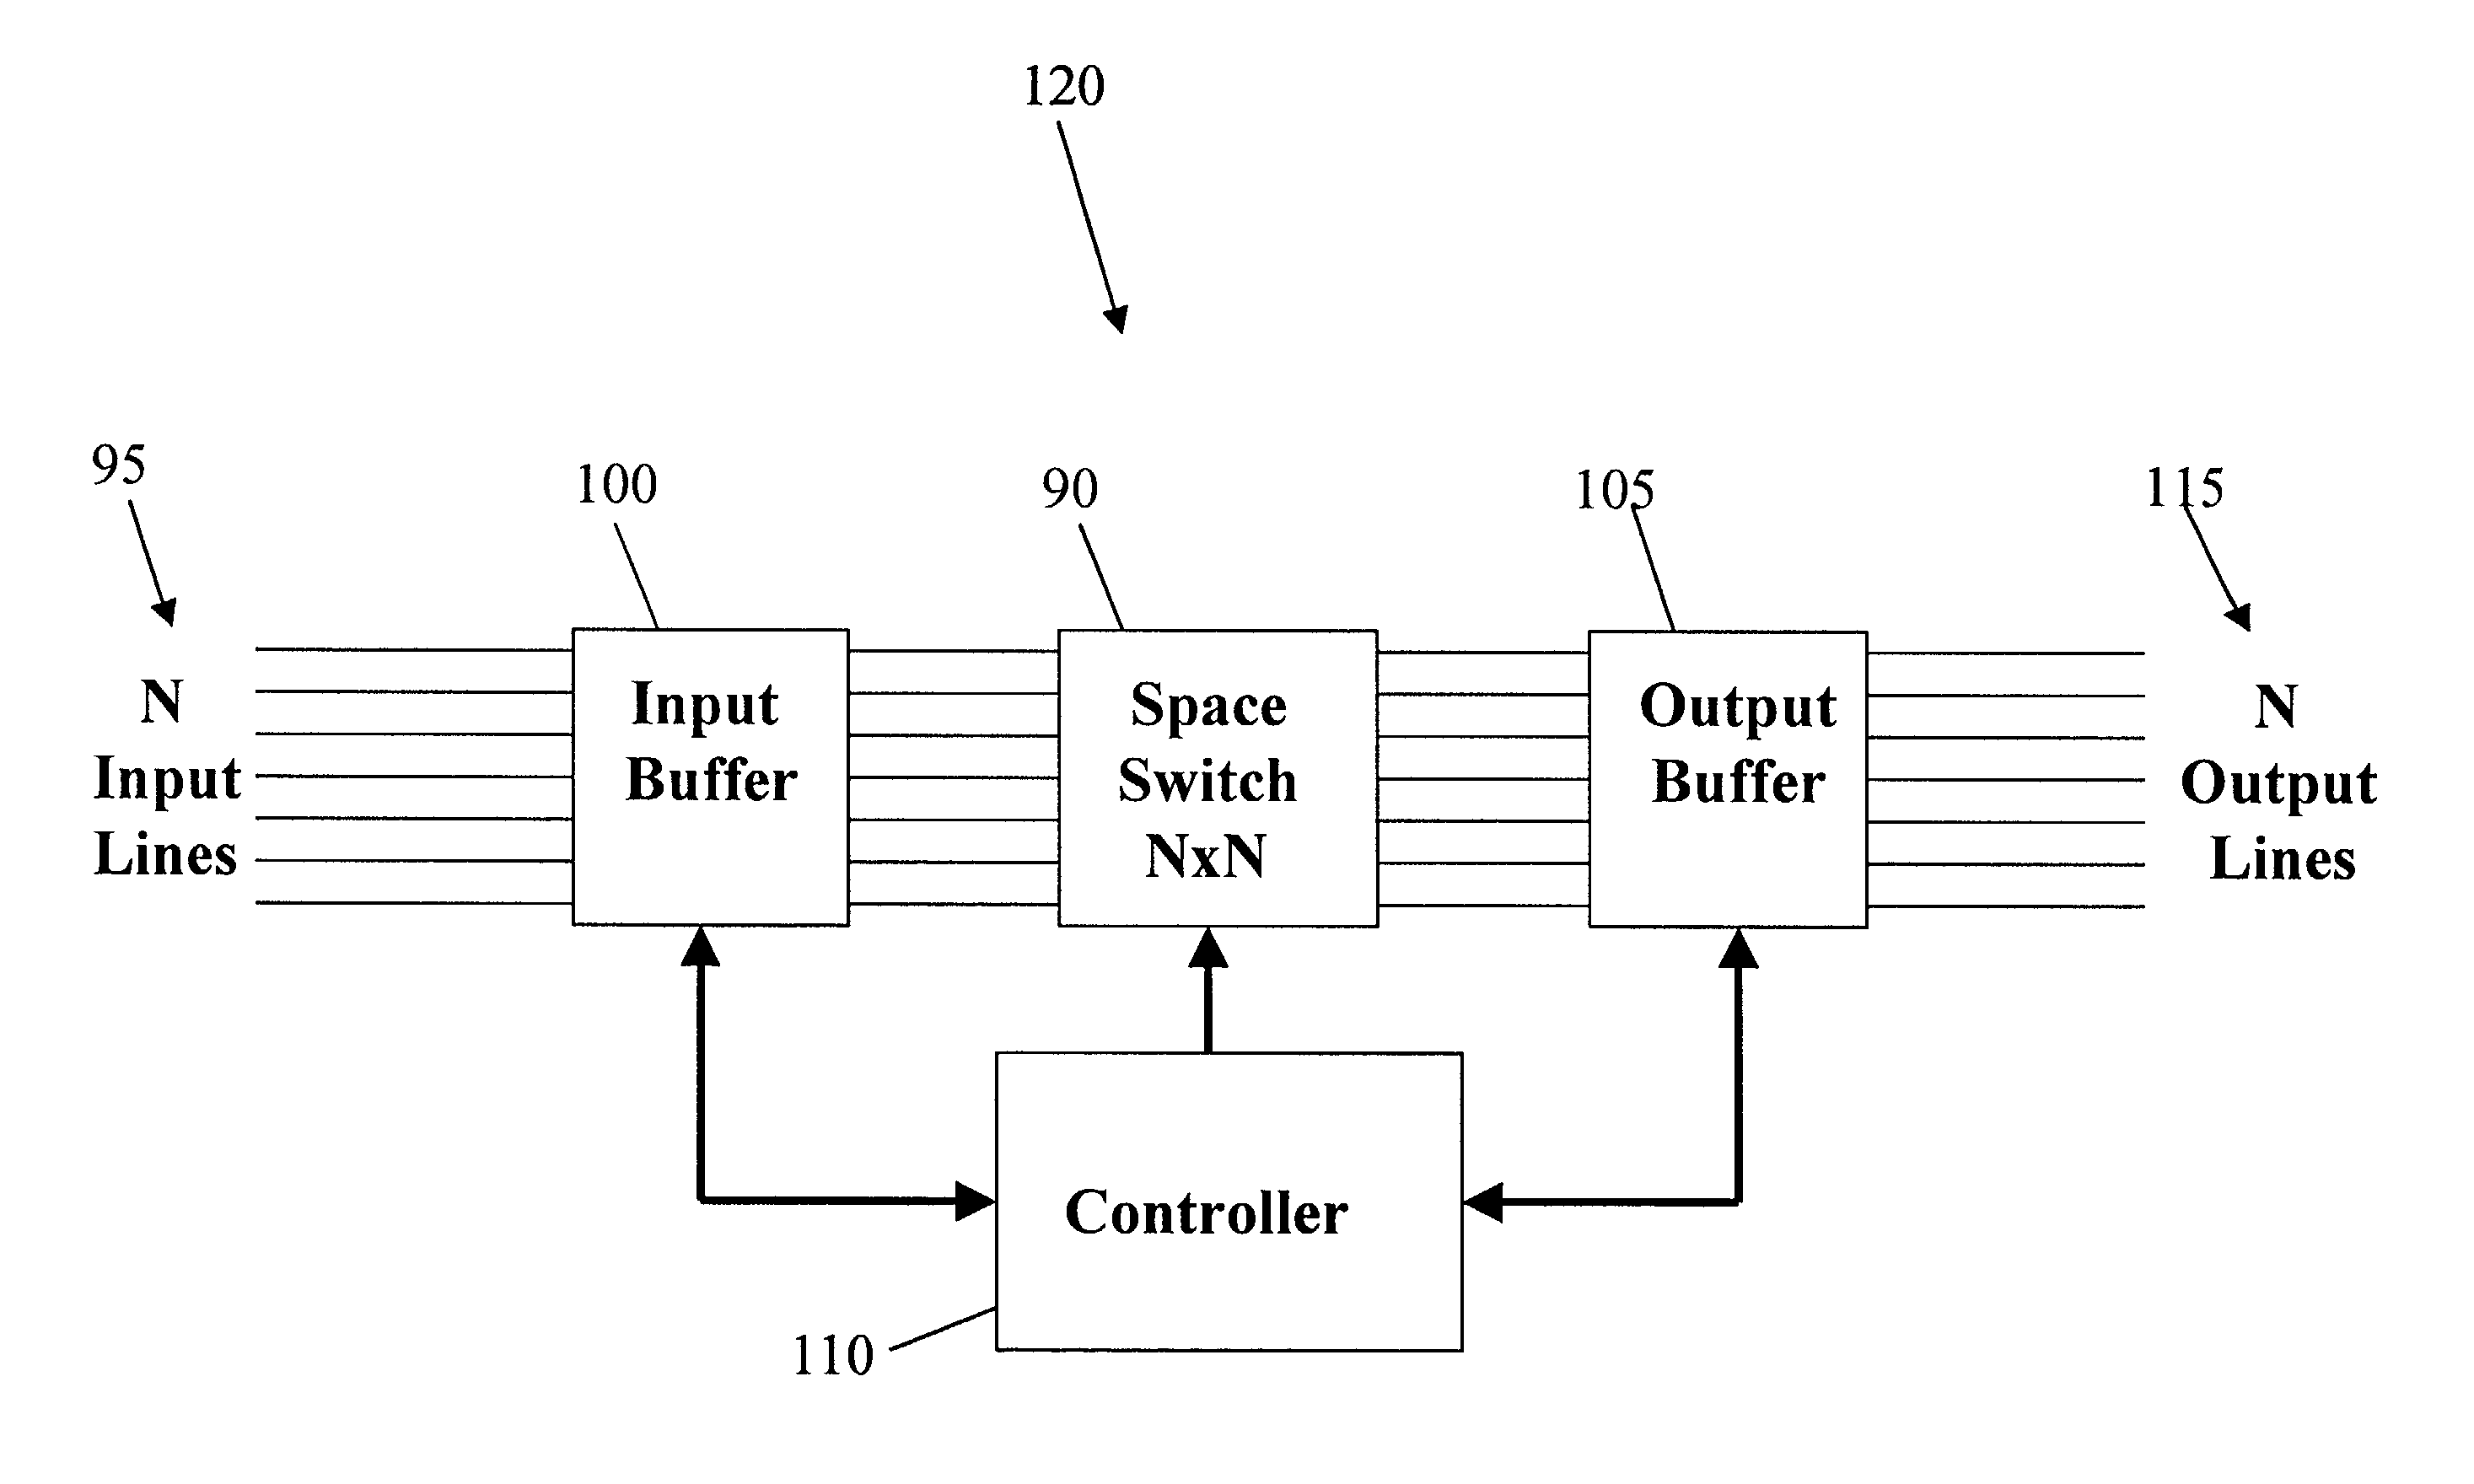 Wide area multi-service communications network based on dynamic channel switching